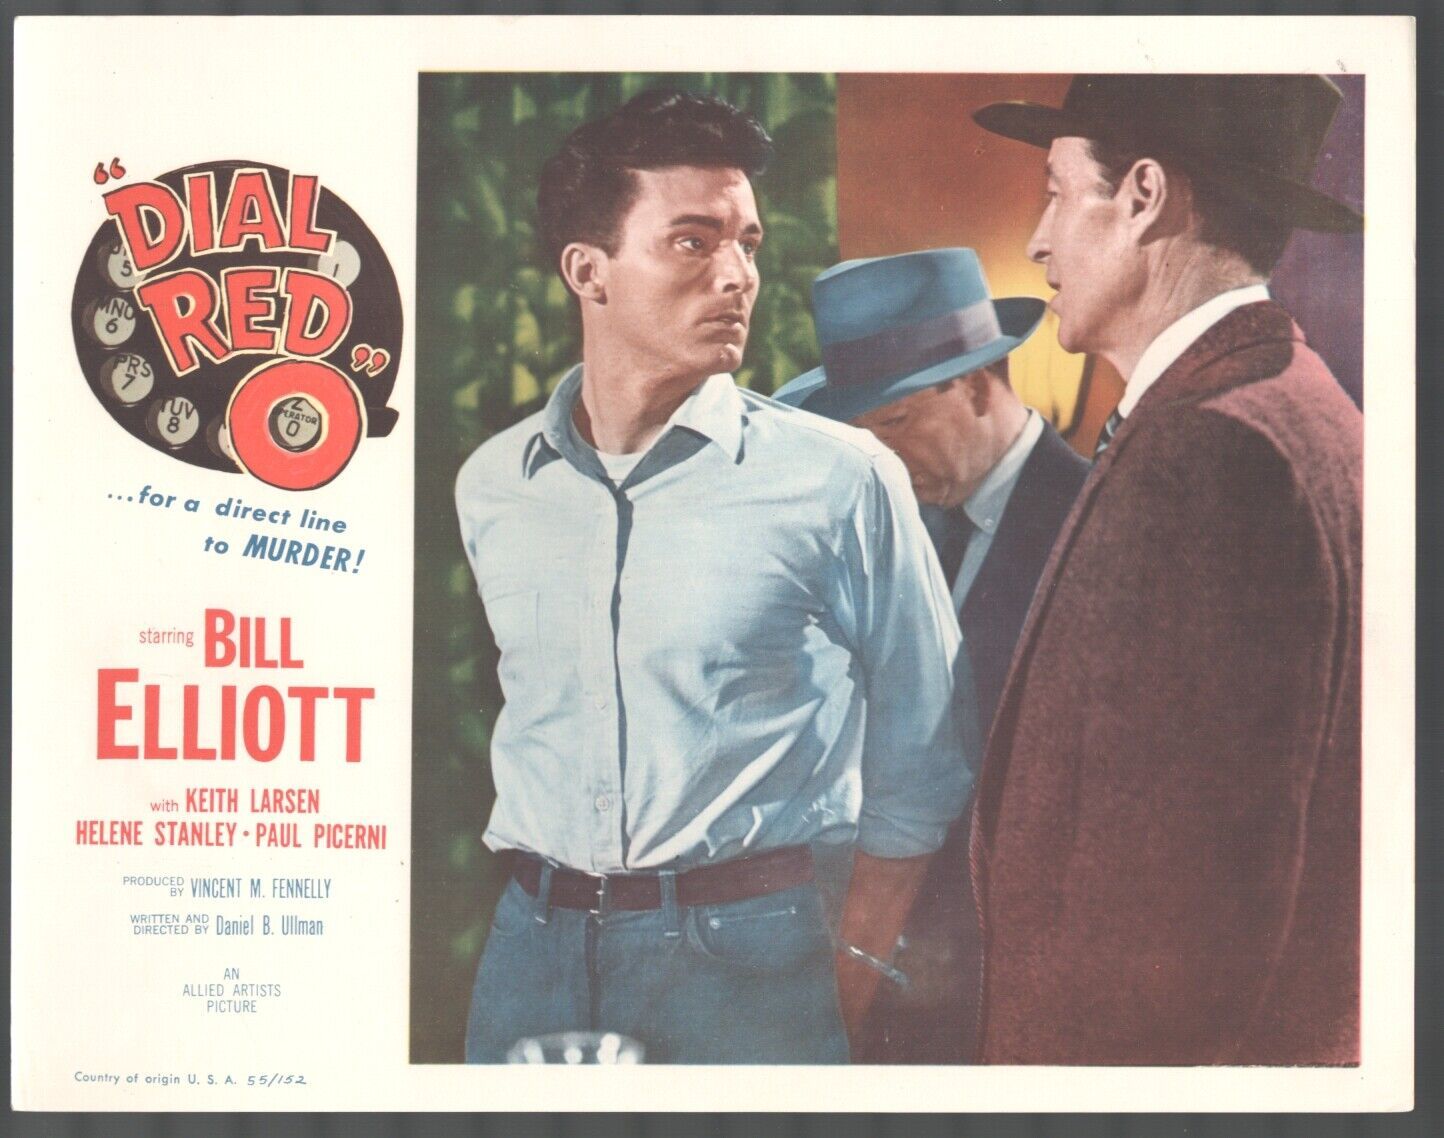 Primary image for Dial Red O 11x14 Lobby Card Keith Larsen